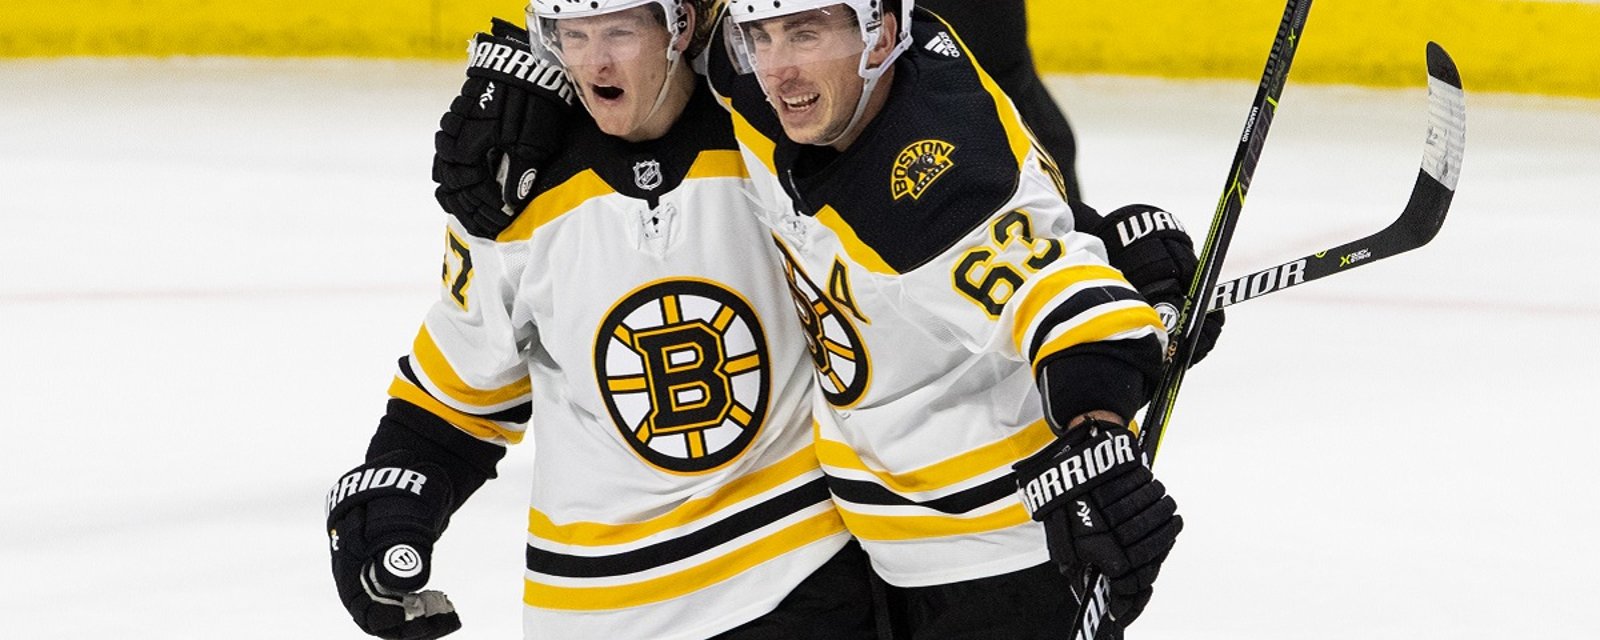 Brad Marchand gets roasted by his own teammate in hilarious fashion.